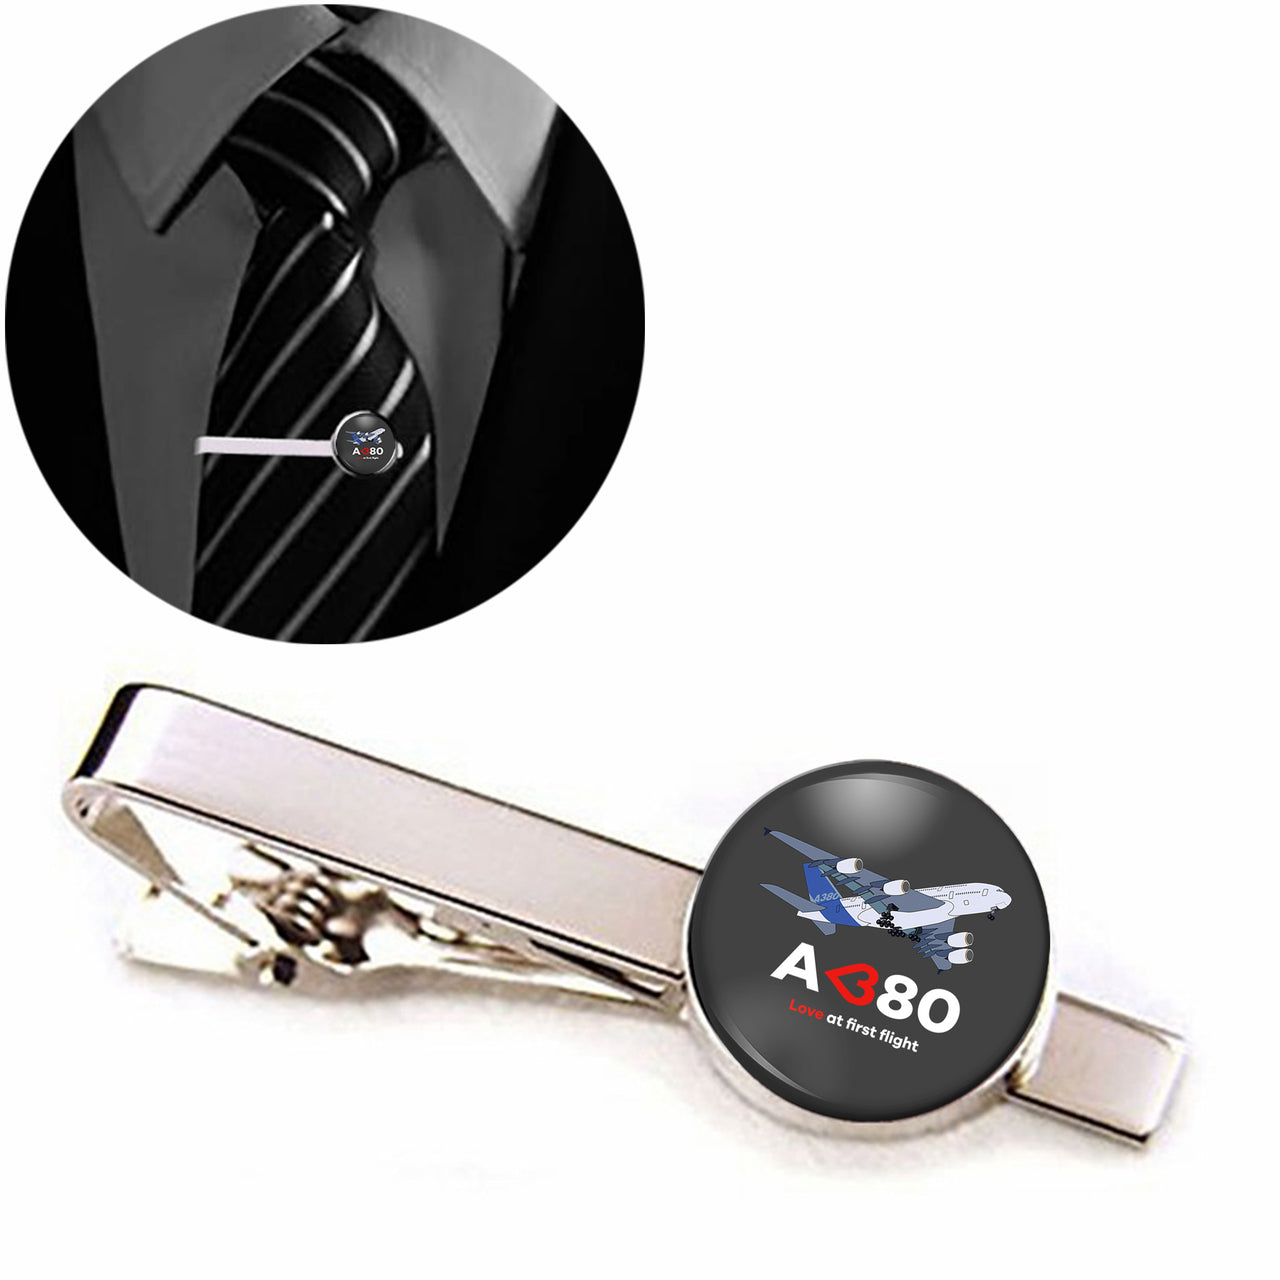 Airbus A380 Love at first flight Designed Tie Clips